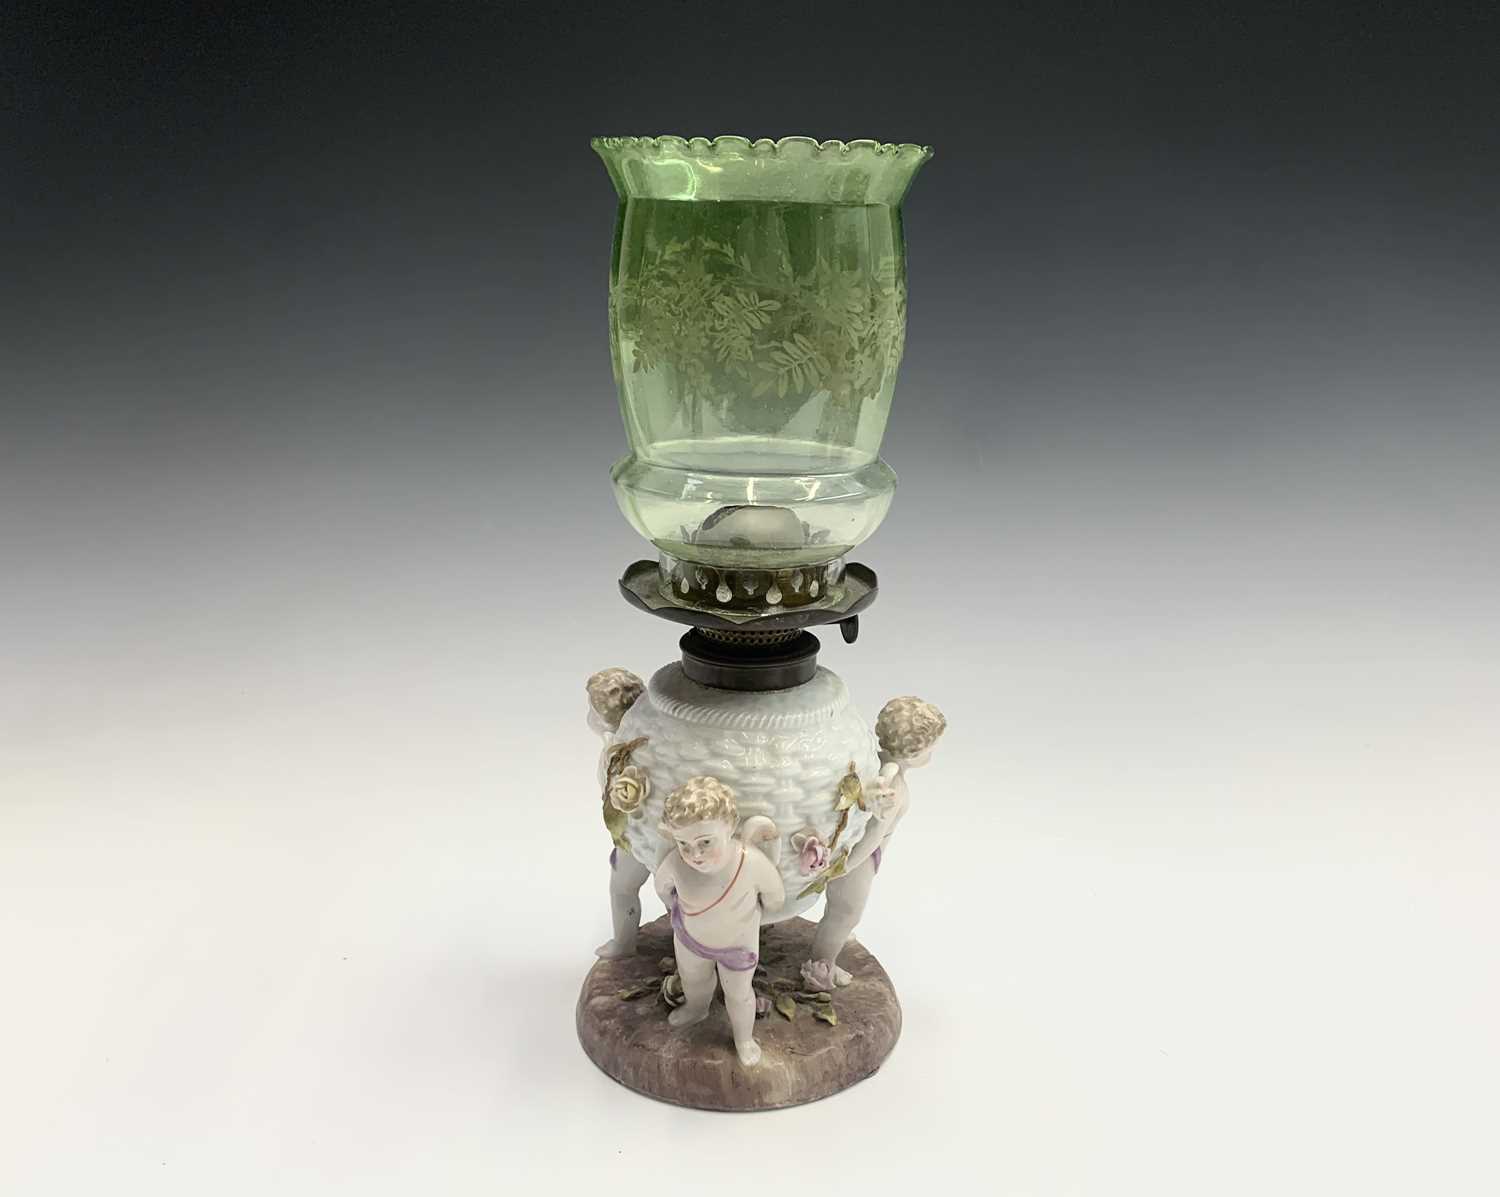 A German porcelain oil lamp base, circa 1900, modelled as a basket supported by three cherubs, - Image 2 of 10